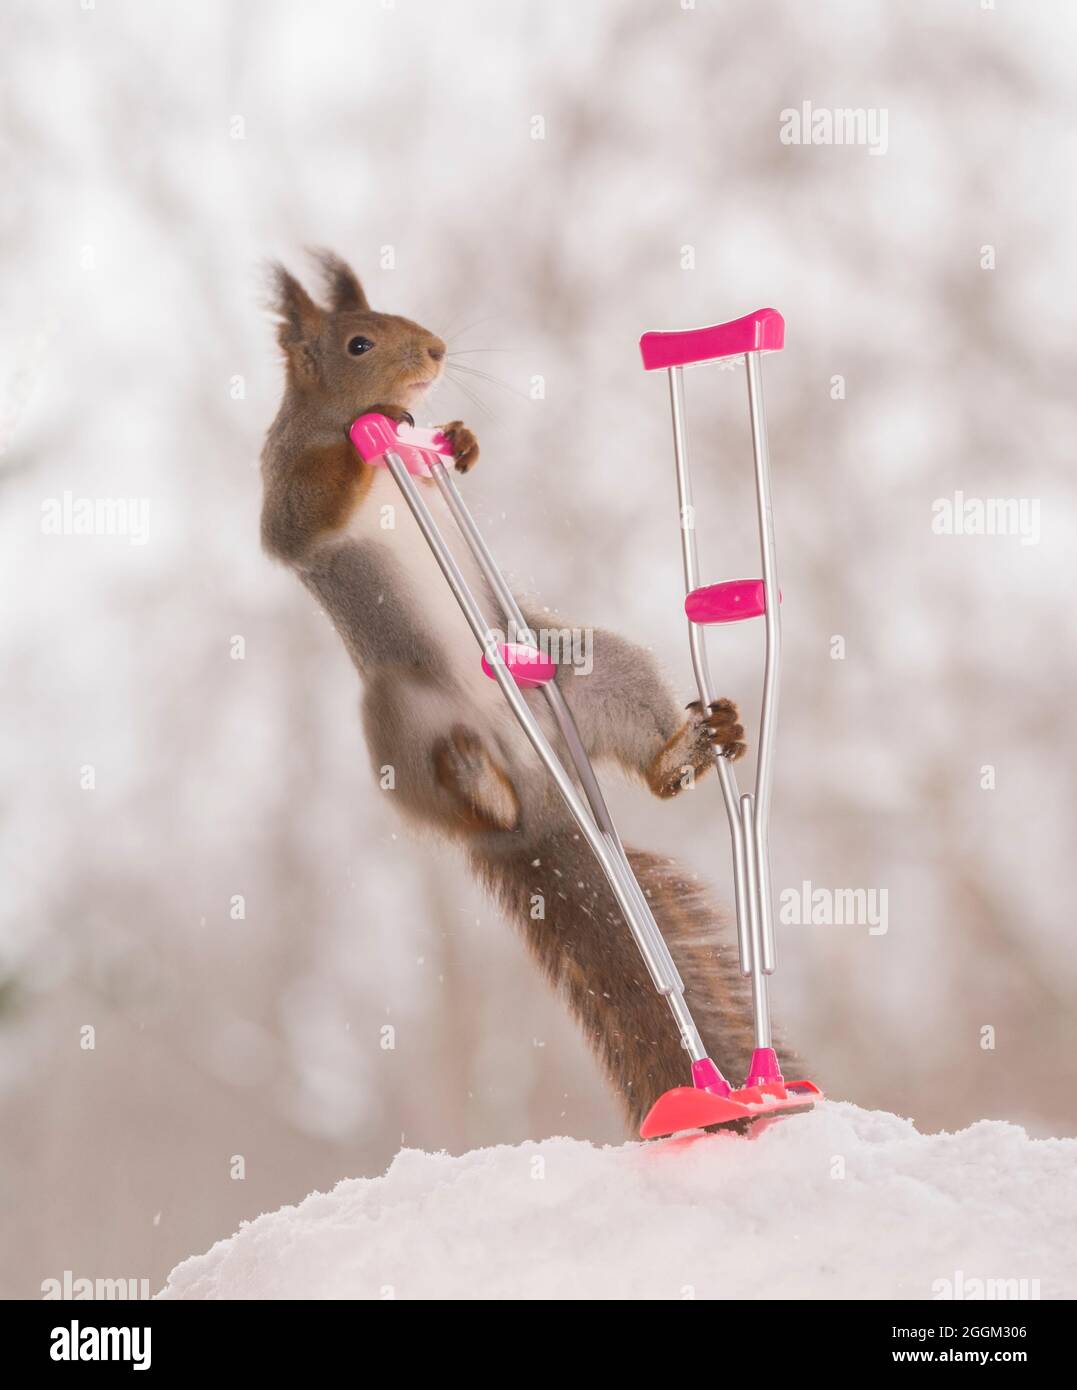 red squirrel is climbing in an crutch and snowboard Stock Photo